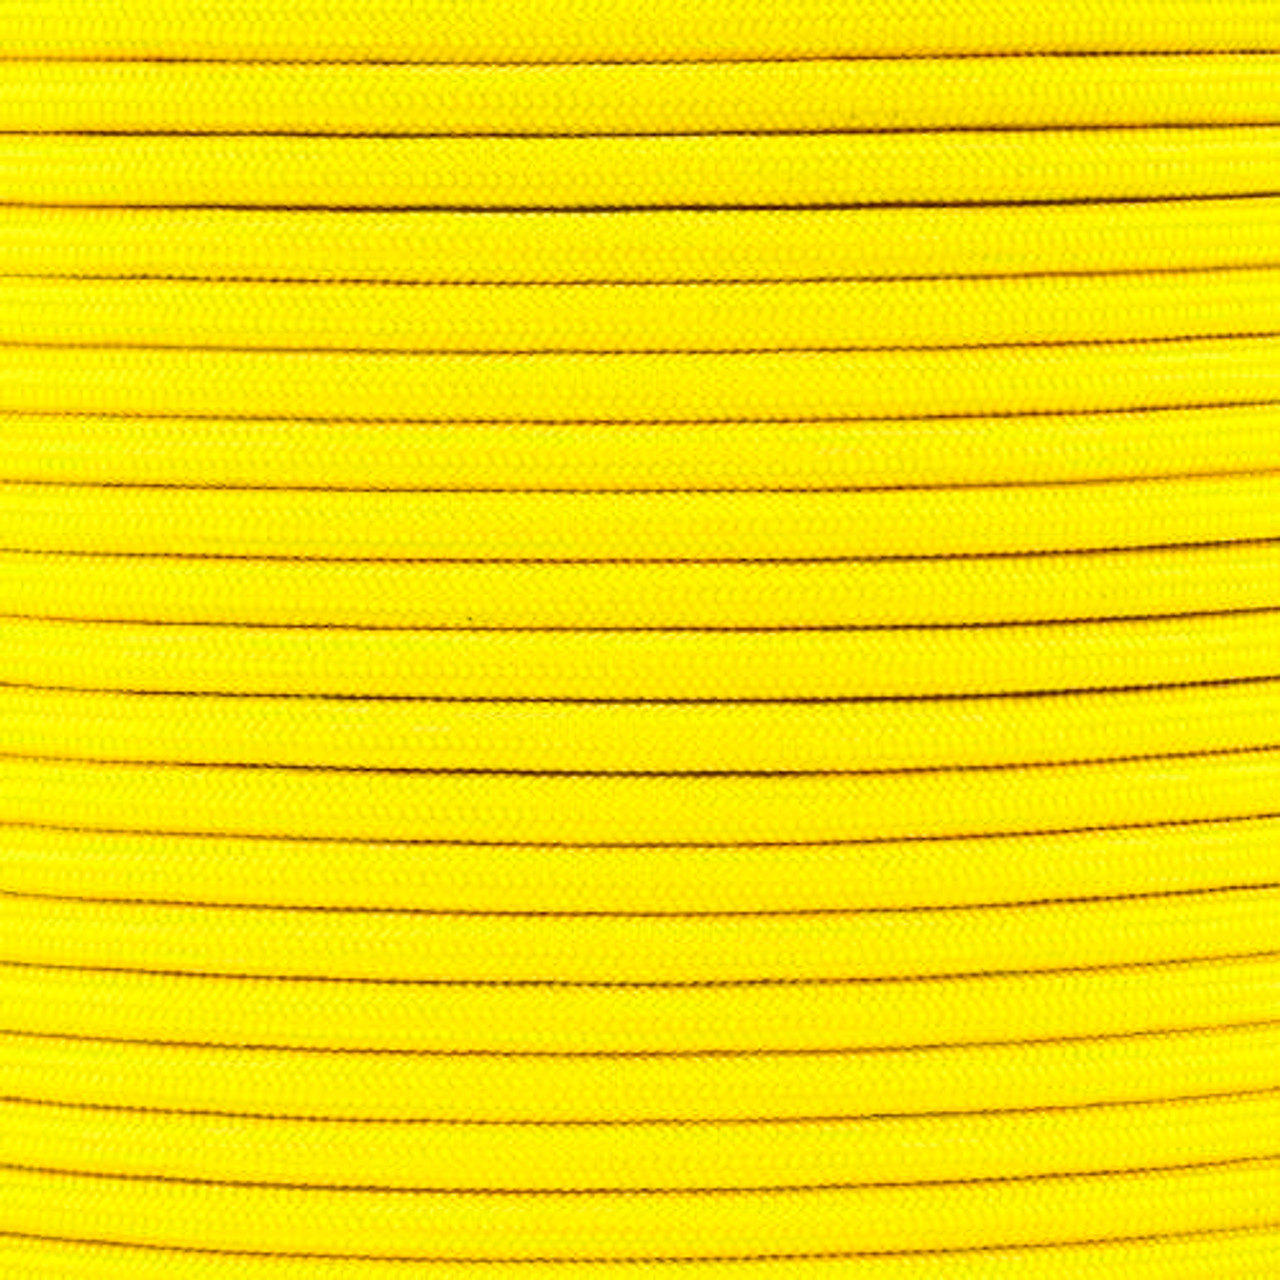 Neon Yellow - 1/4in ParaMax Paracord 1200 lb Tensile Strength